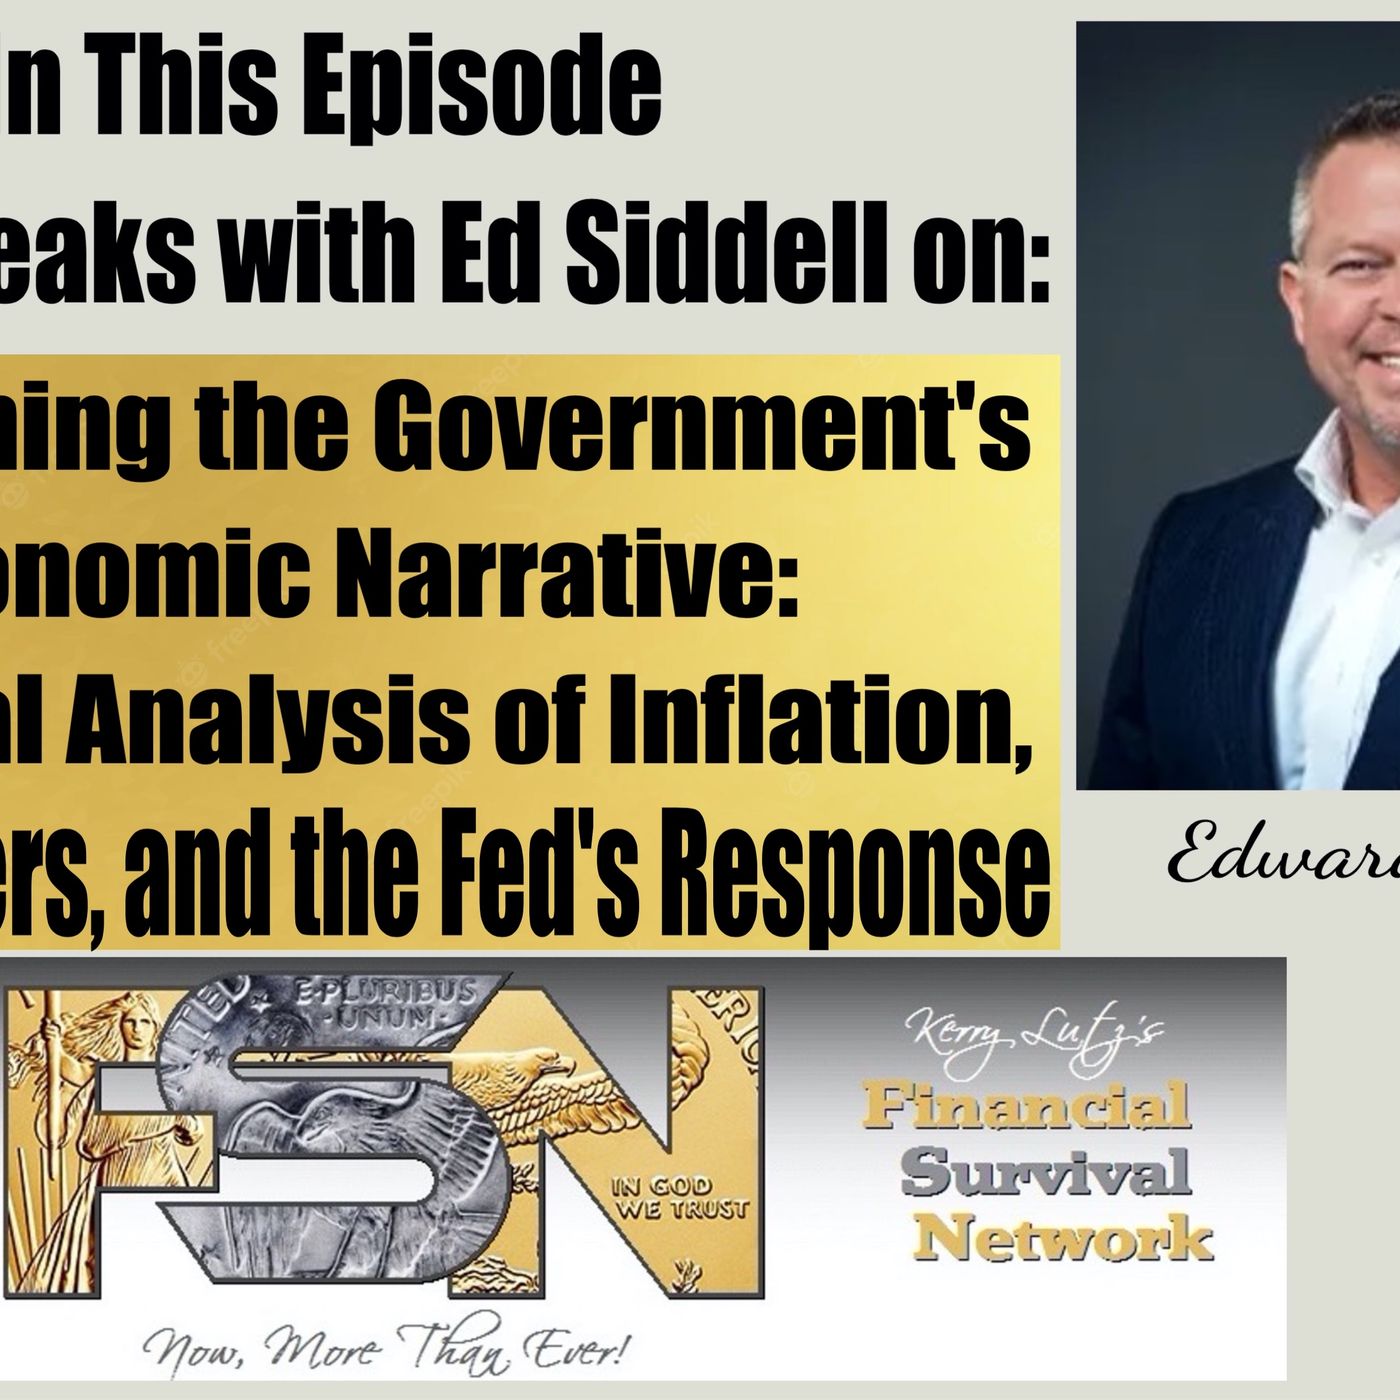 Questioning the Government's Economic Narrative: A Critical Analysis of Inflation, PPI Numbers, and the Federal Reserve's Response - Ed Sidd